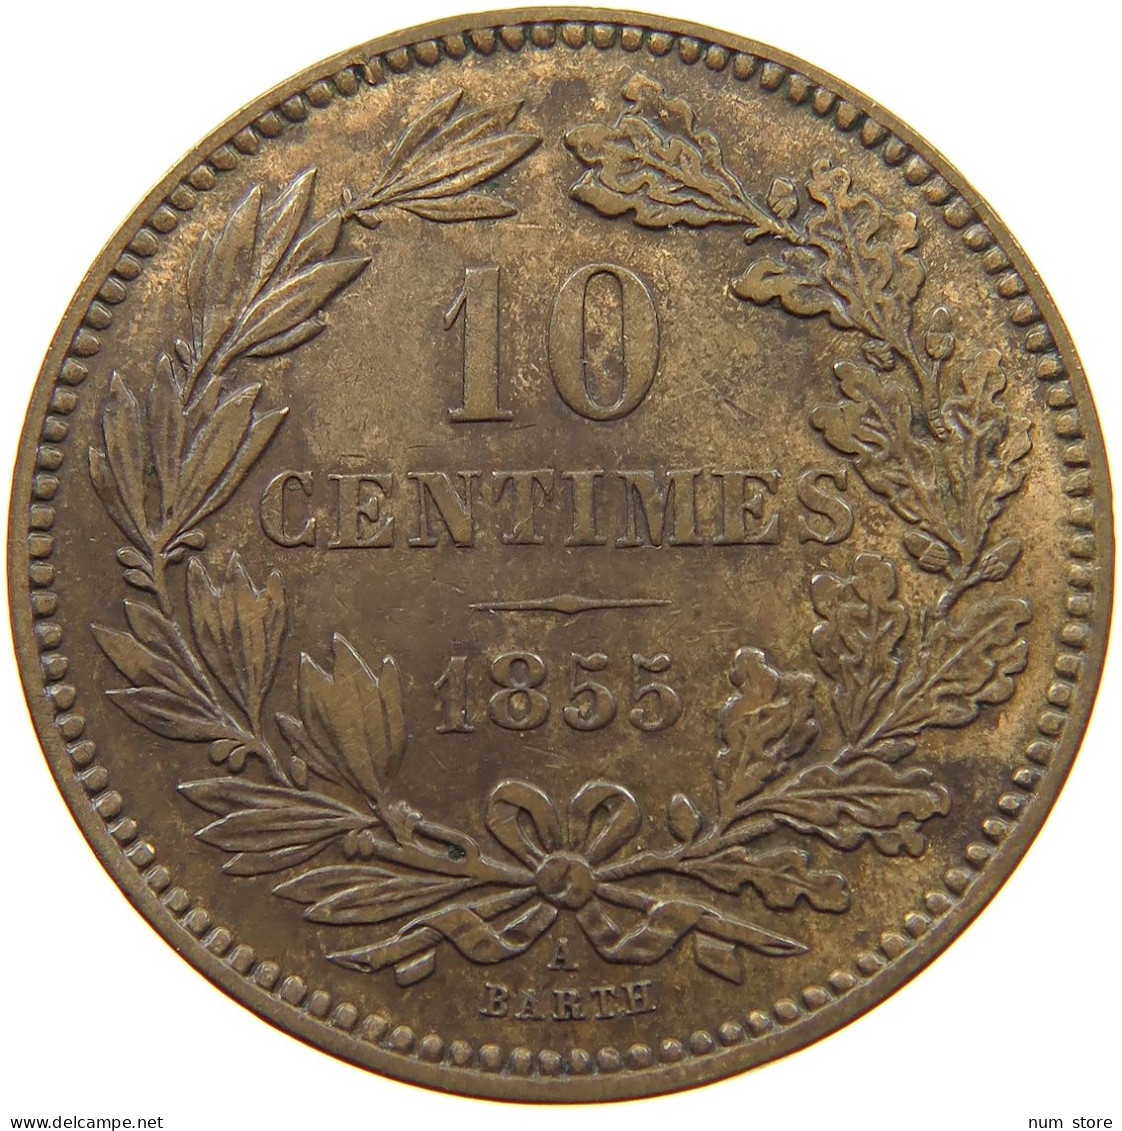 LUXEMBOURG 10 CENTIMES 1855 A Willem III. 1849-1890 #c003 0151 - Luxembourg